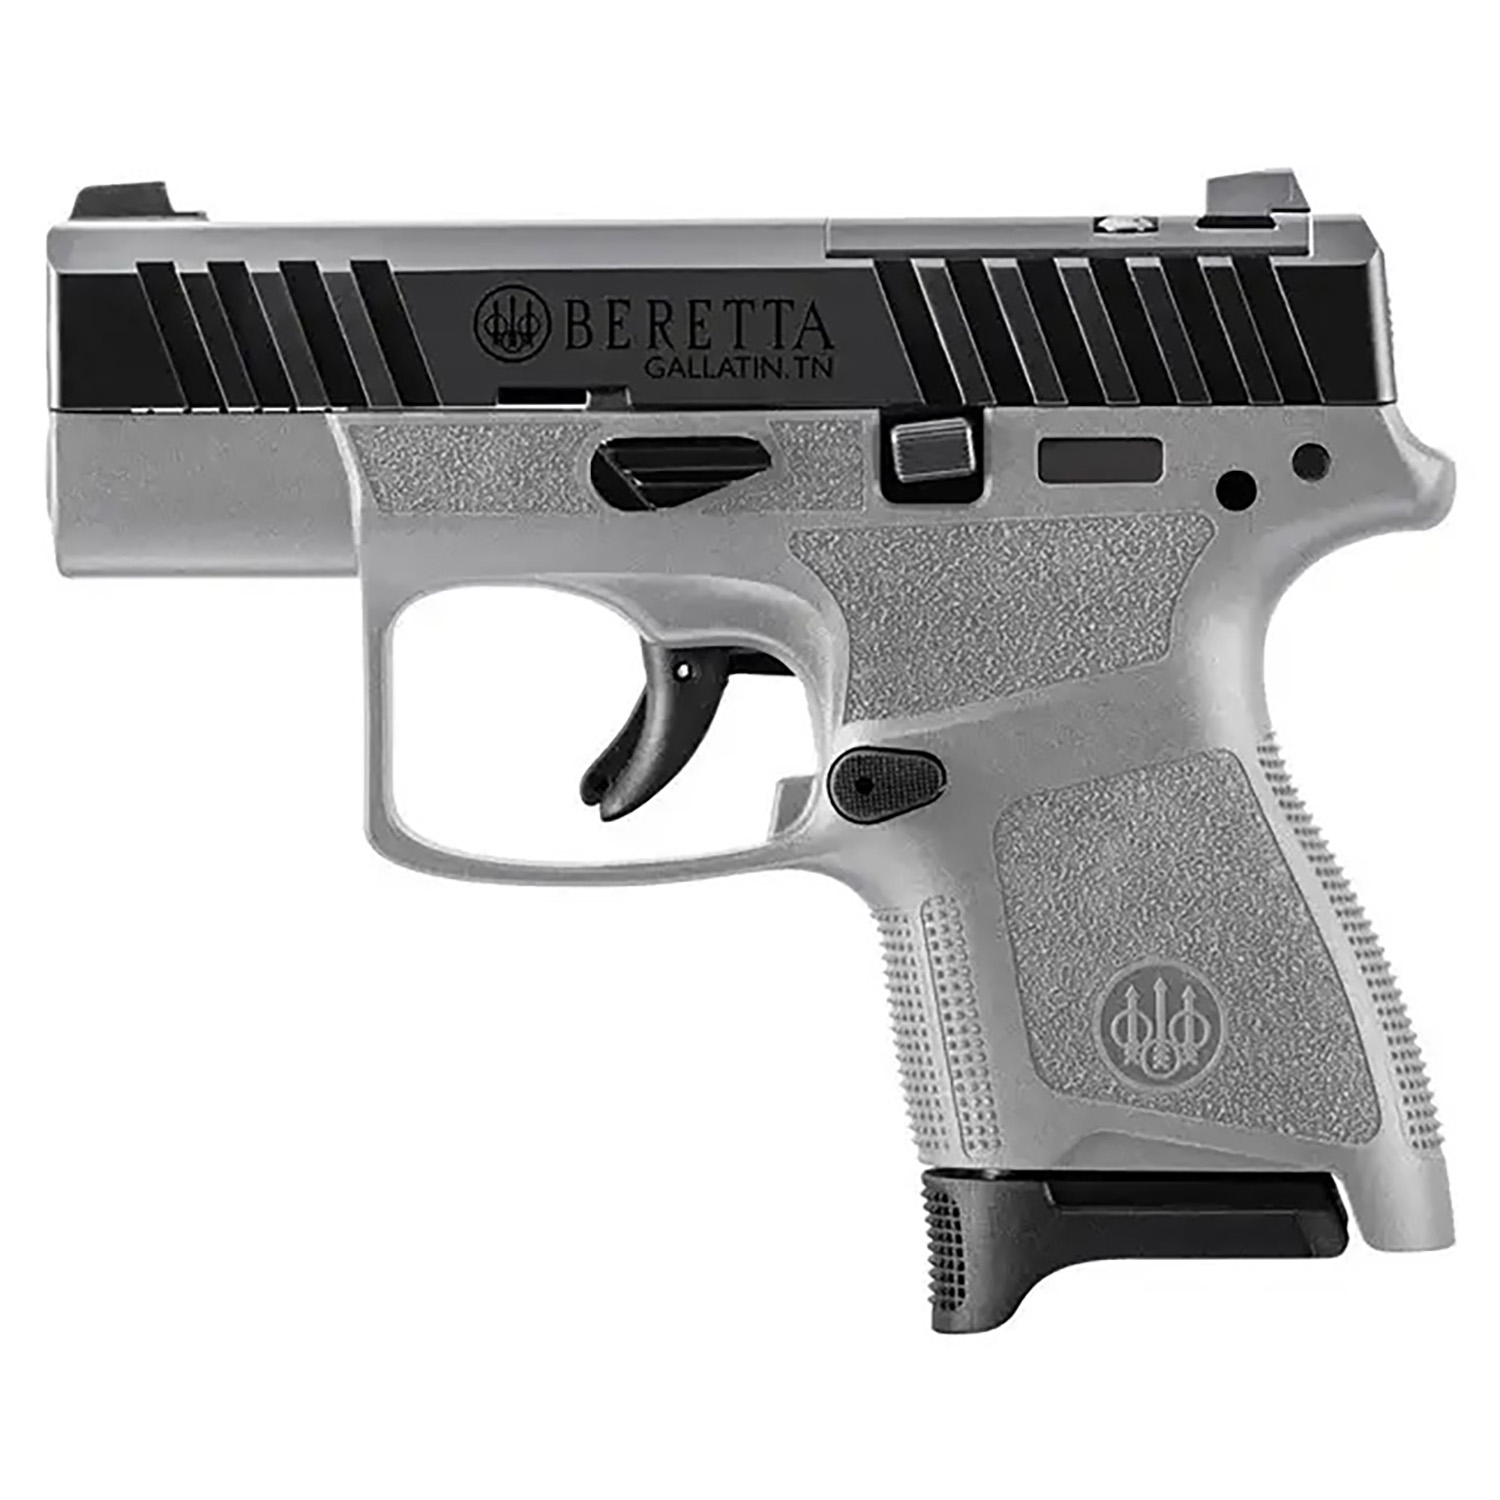 BERETTA JAXN9268A1CO APX-A1 CARRY OPTC 9MM 3   8R WGRY